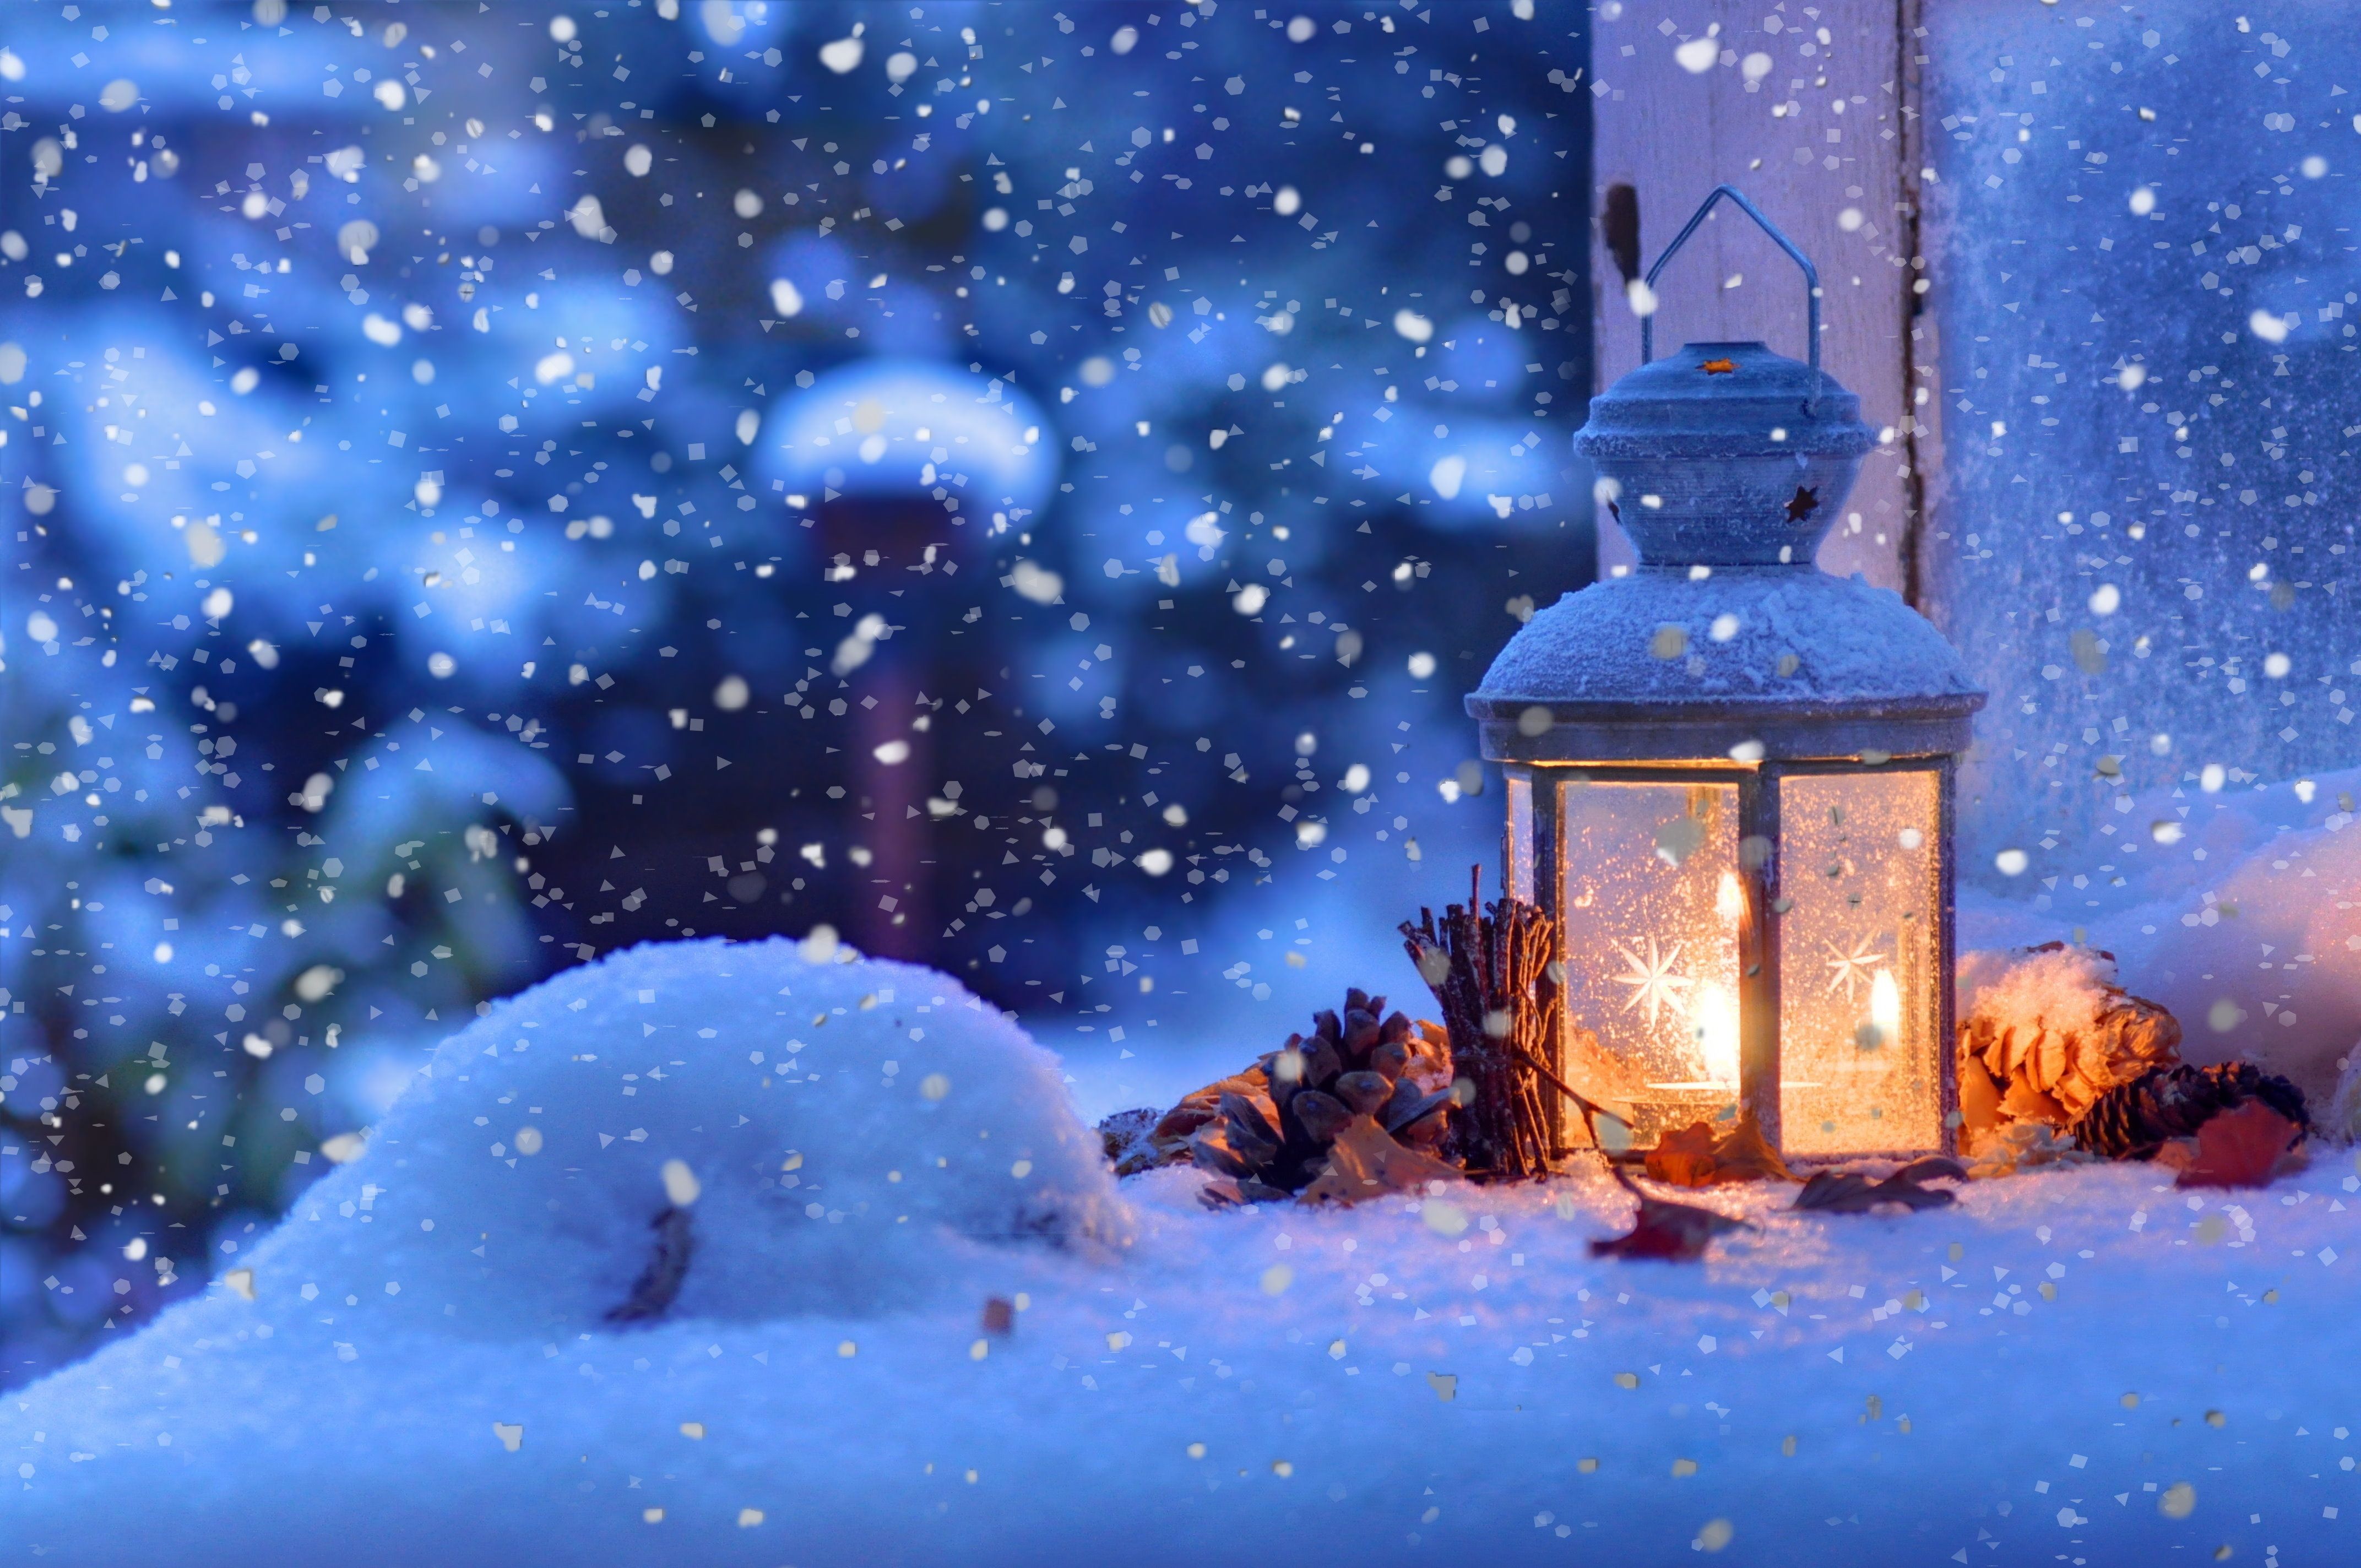 Winter Christmas Wallpaper For iPhone Free Download > SubWallpaper